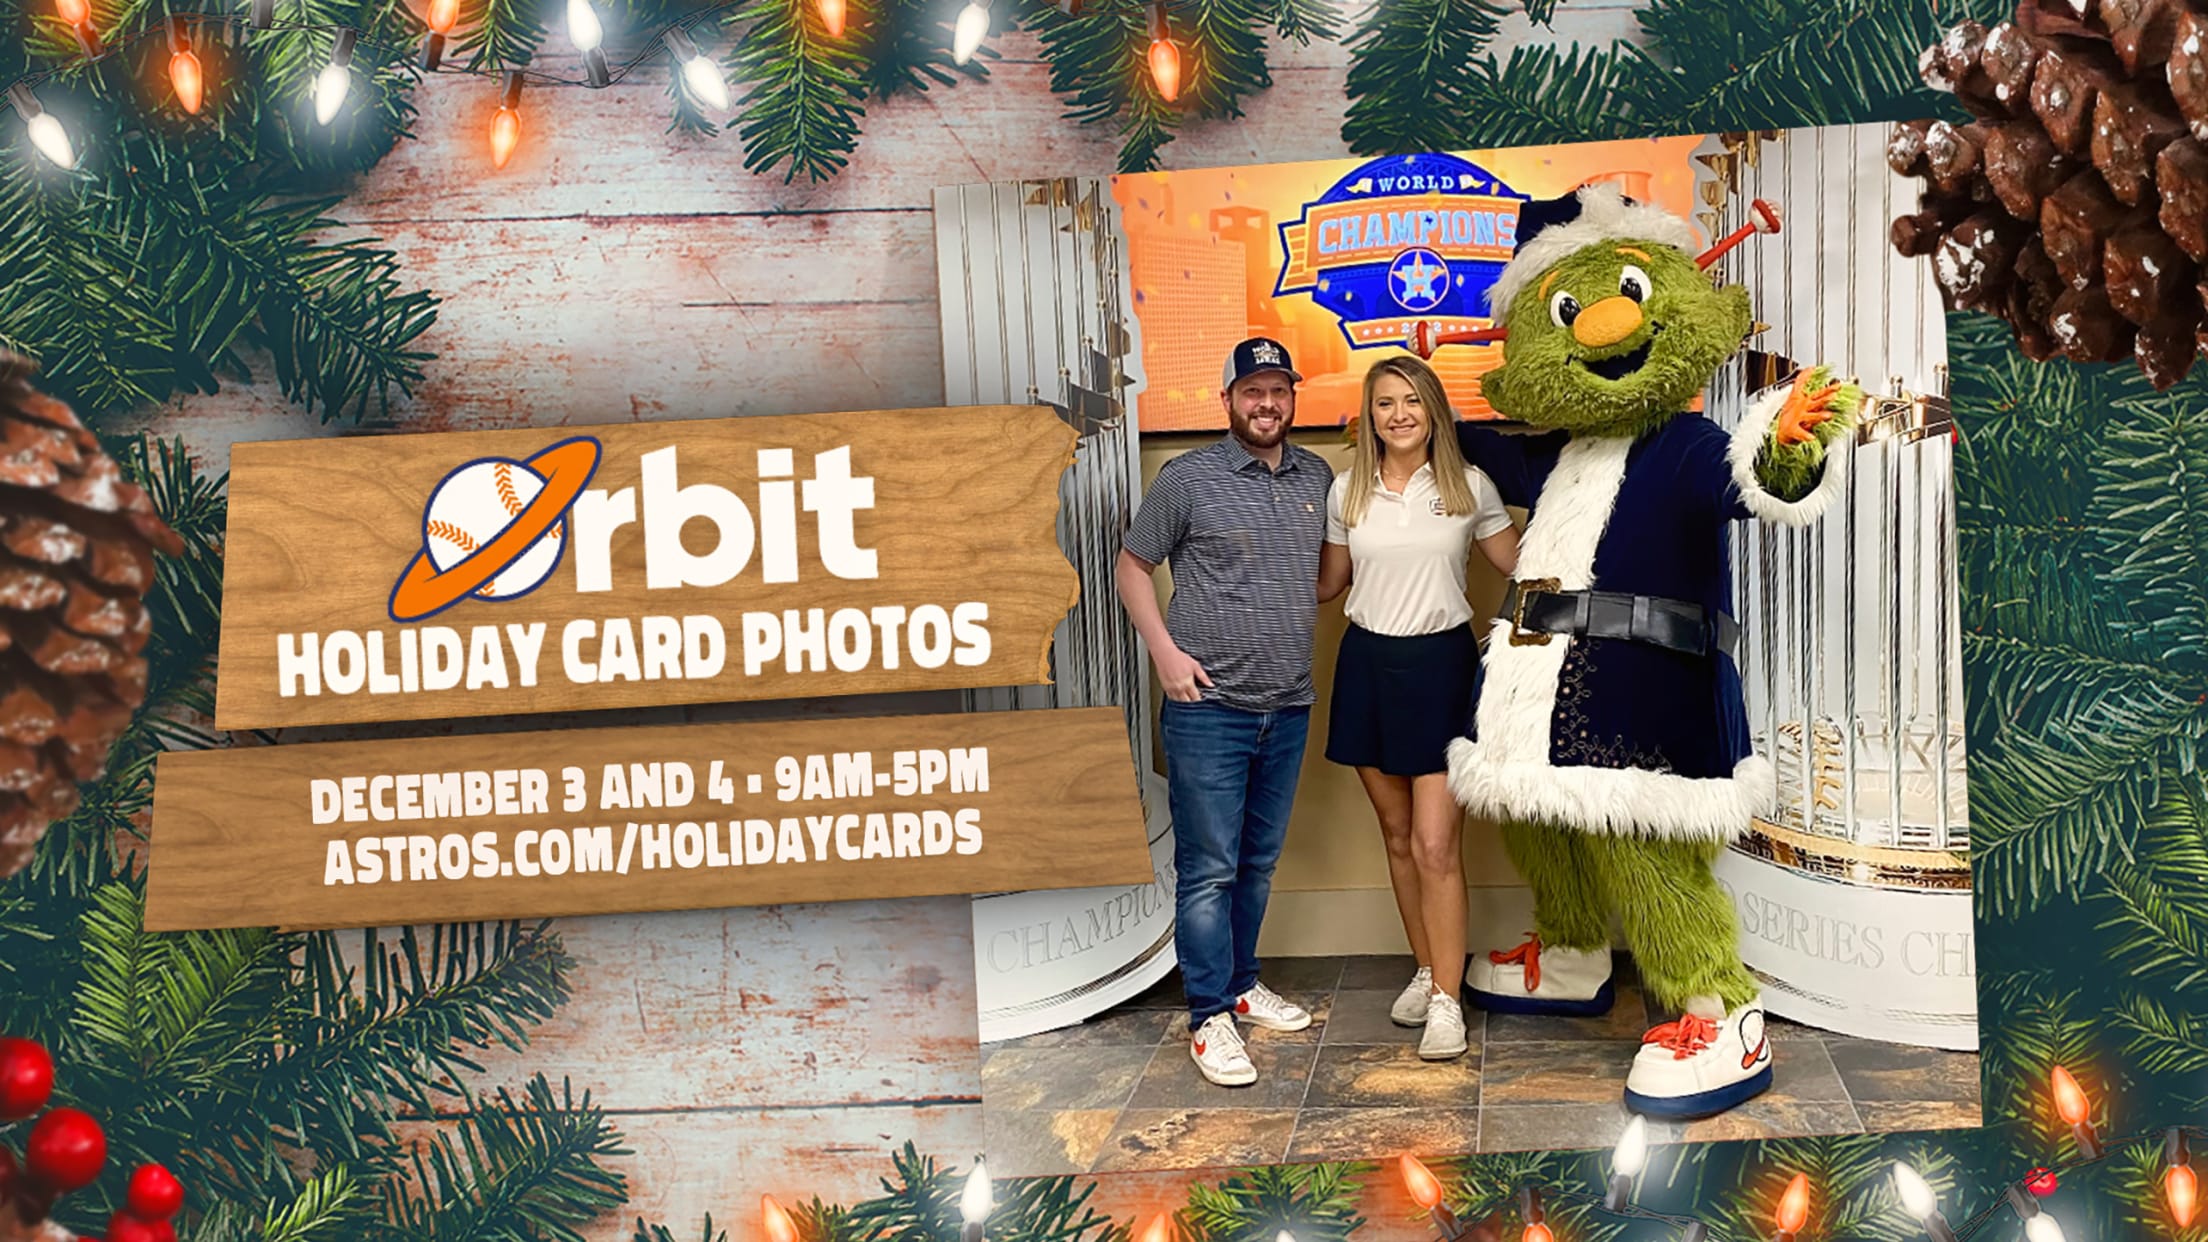 Grab your family and friends and take a picture with Orbit - ABC13 Houston